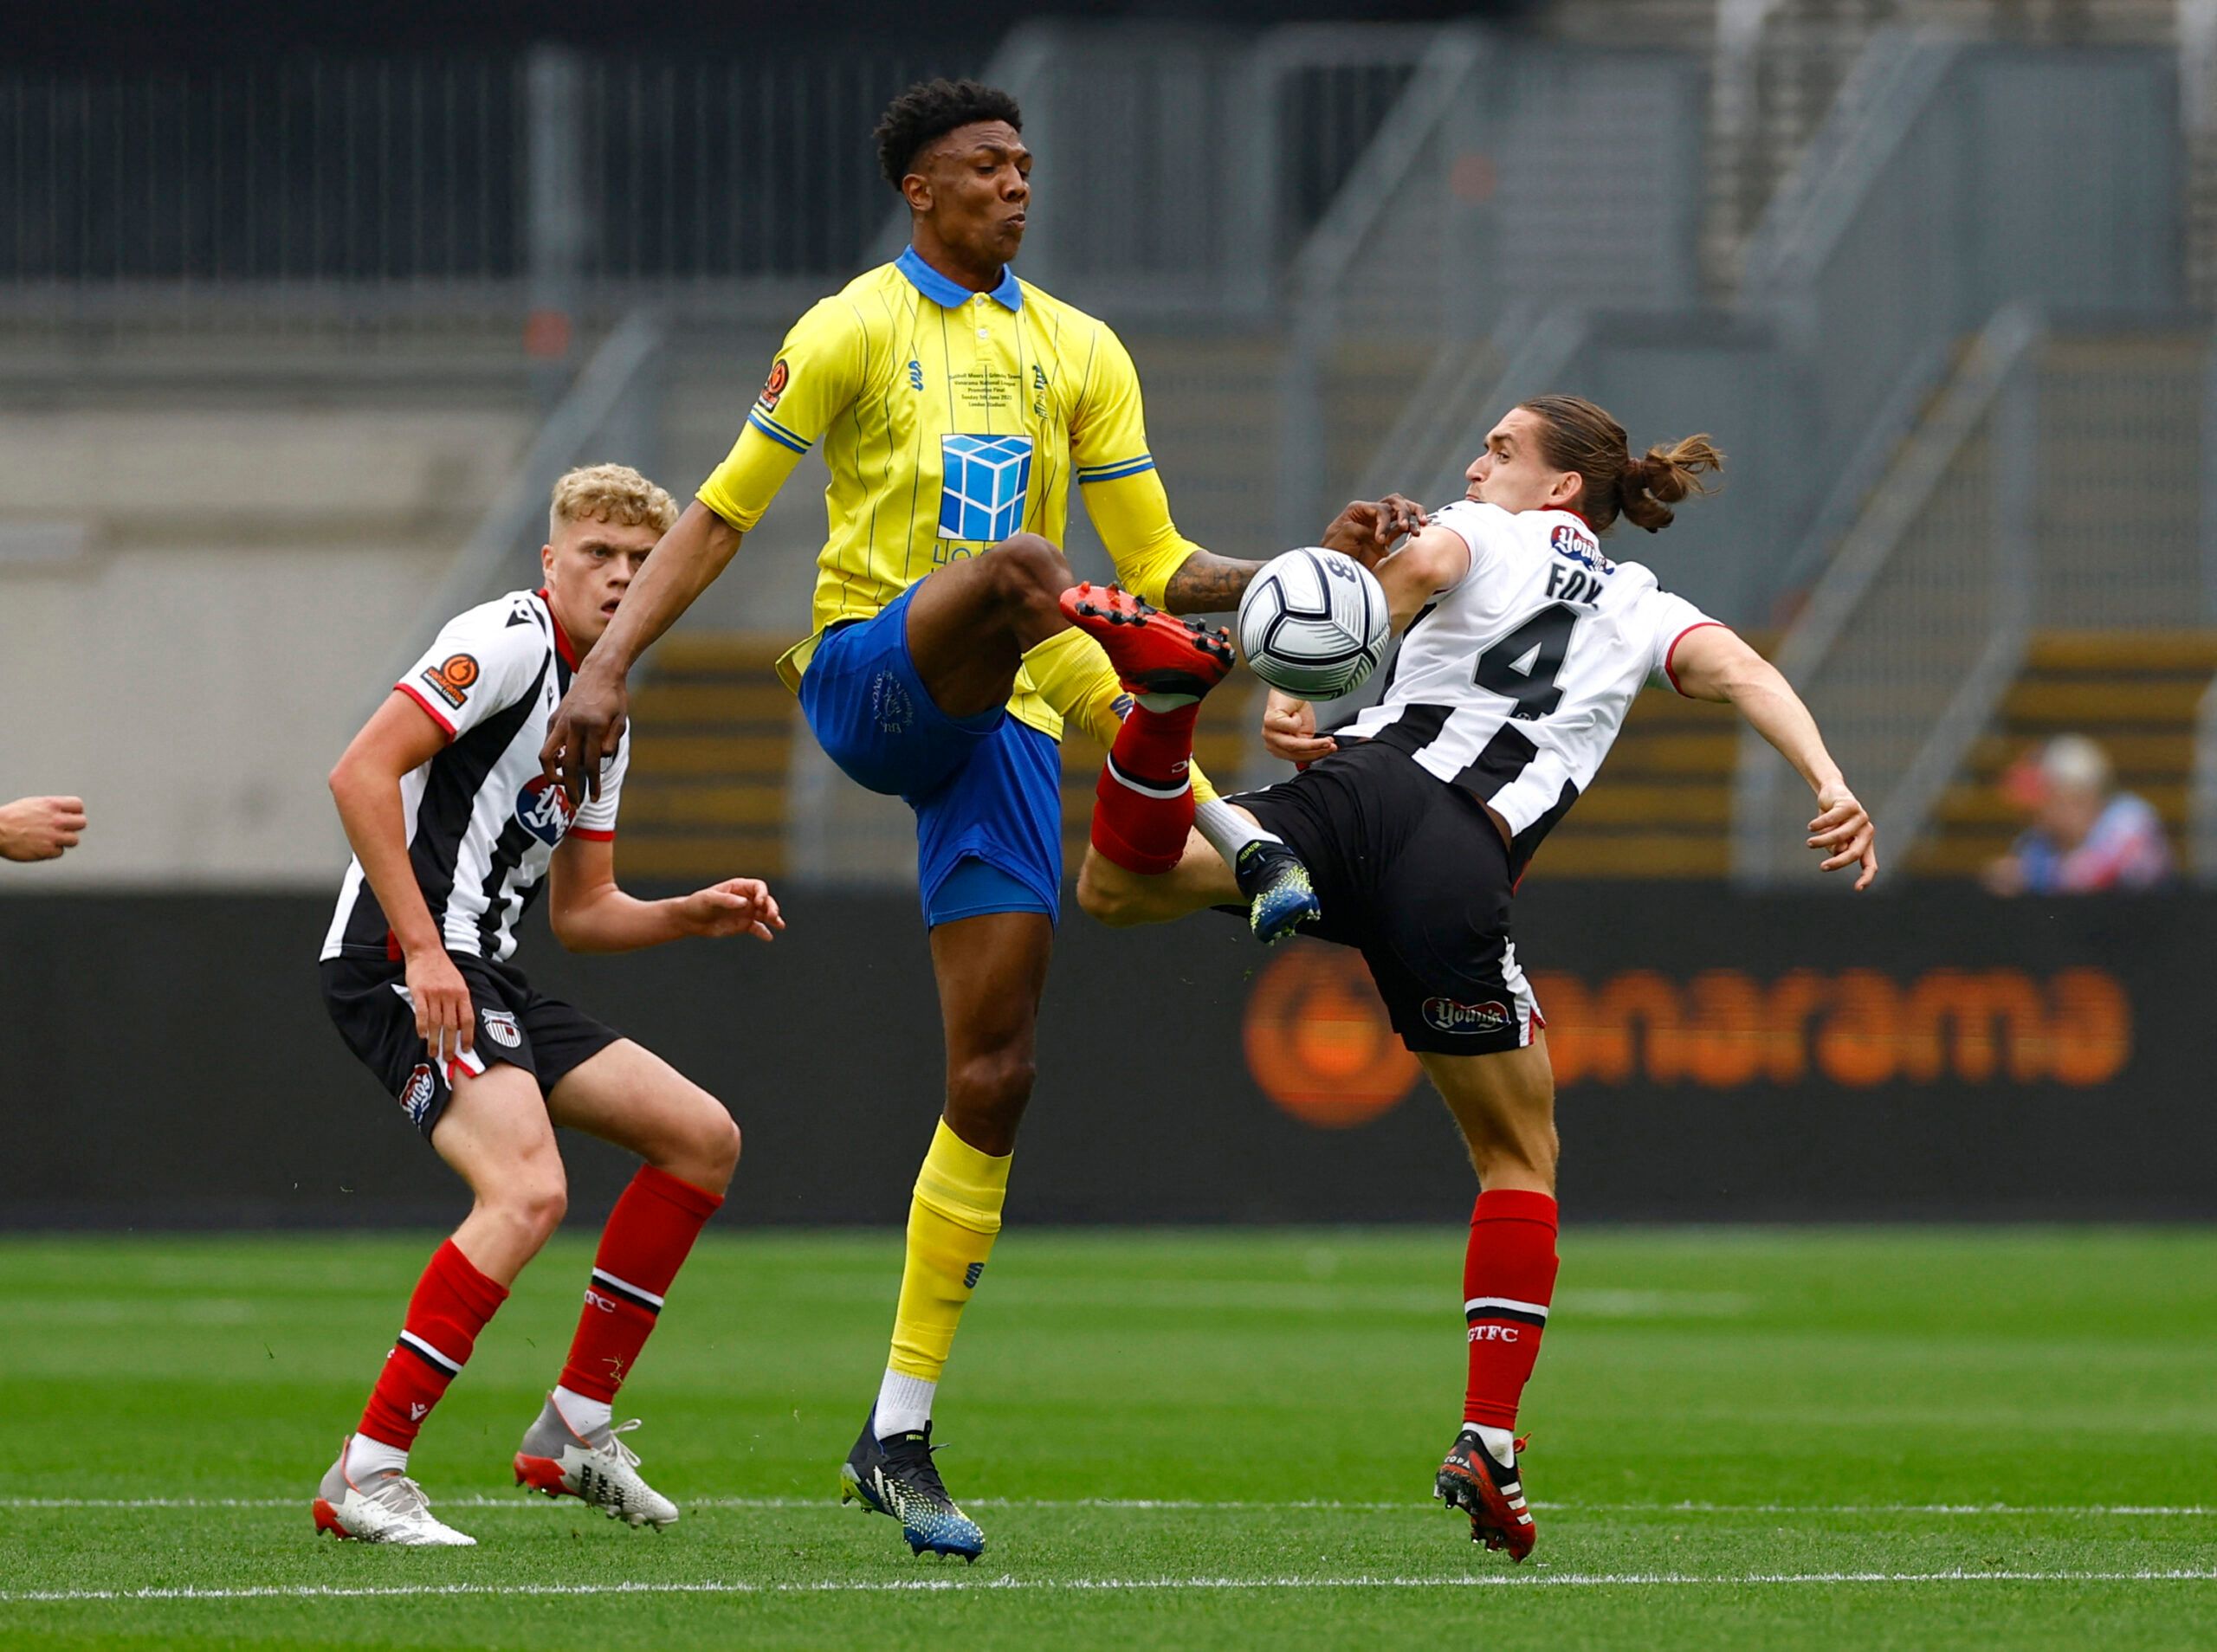 Soccer Football - National League - Promotion Final - Solihull Moors v Grimsby Town - London Stadium, London, Britain - June 5, 2022 Solihull Moors' Kyle Hudlin in action with Grimsby Town's Ben Fox Action Images/Andrew Boyers EDITORIAL USE ONLY. No use with unauthorized audio, video, data, fixture lists, club/league logos or 'live' services. Online in-match use limited to 75 images, no video emulation. No use in betting, games or single club /league/player publications.  Please contact your acc